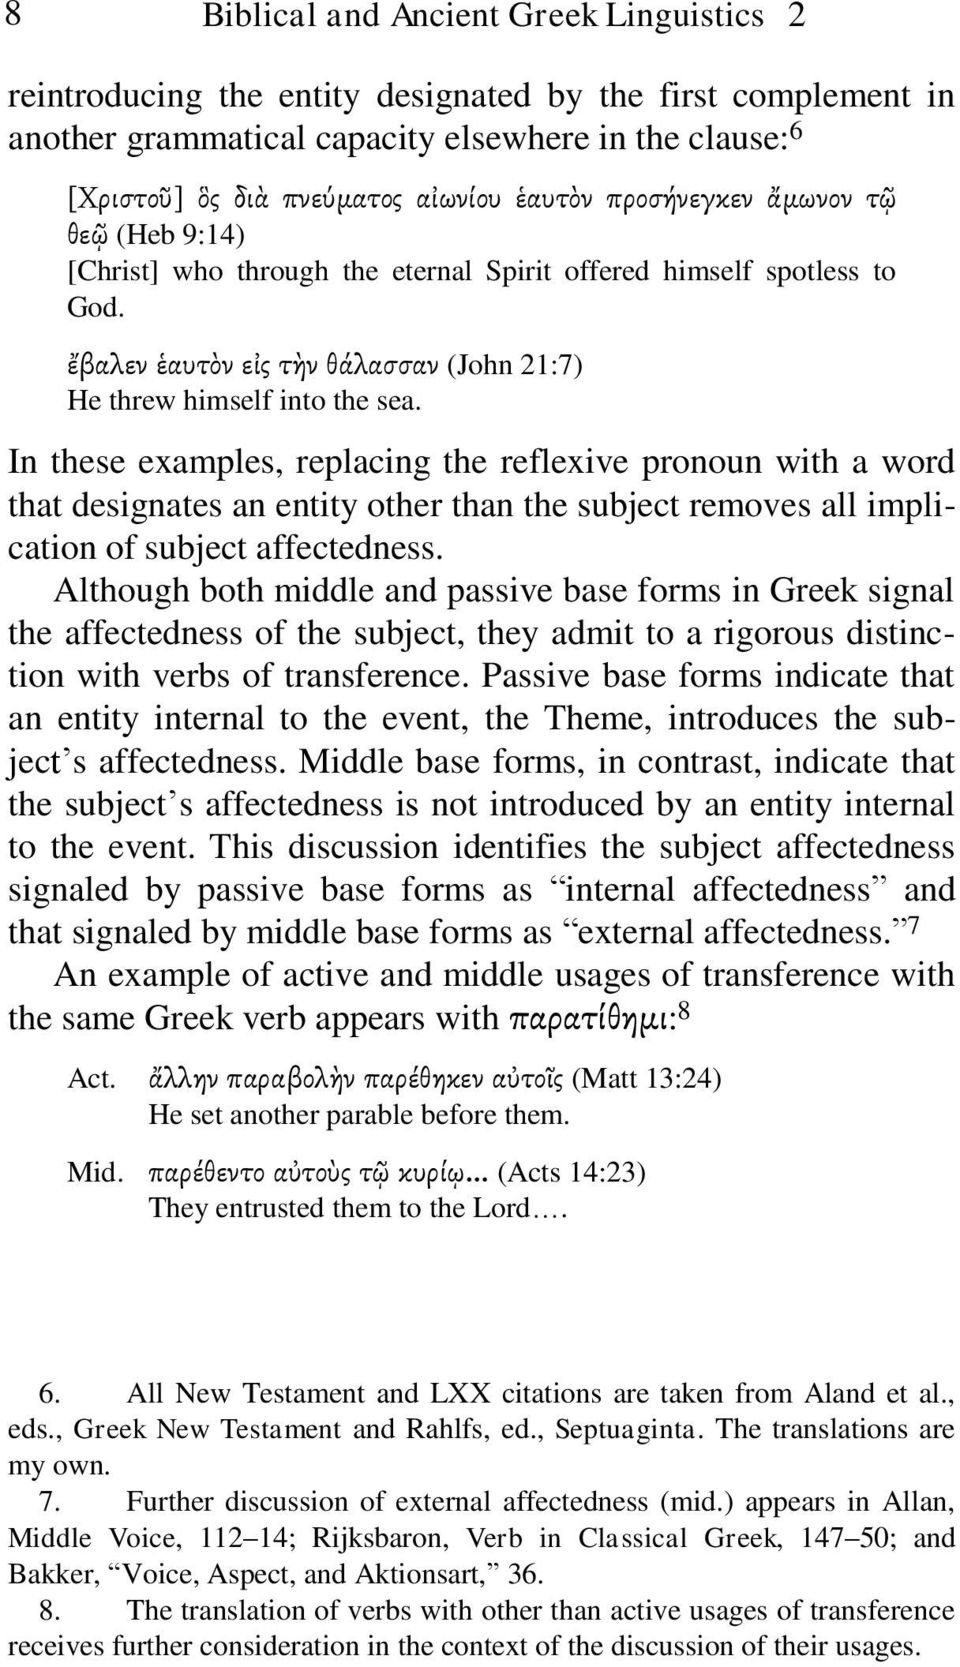 In these examples, replacing the reflexive pronoun with a word that designates an entity other than the subject removes all implication of subject affectedness.